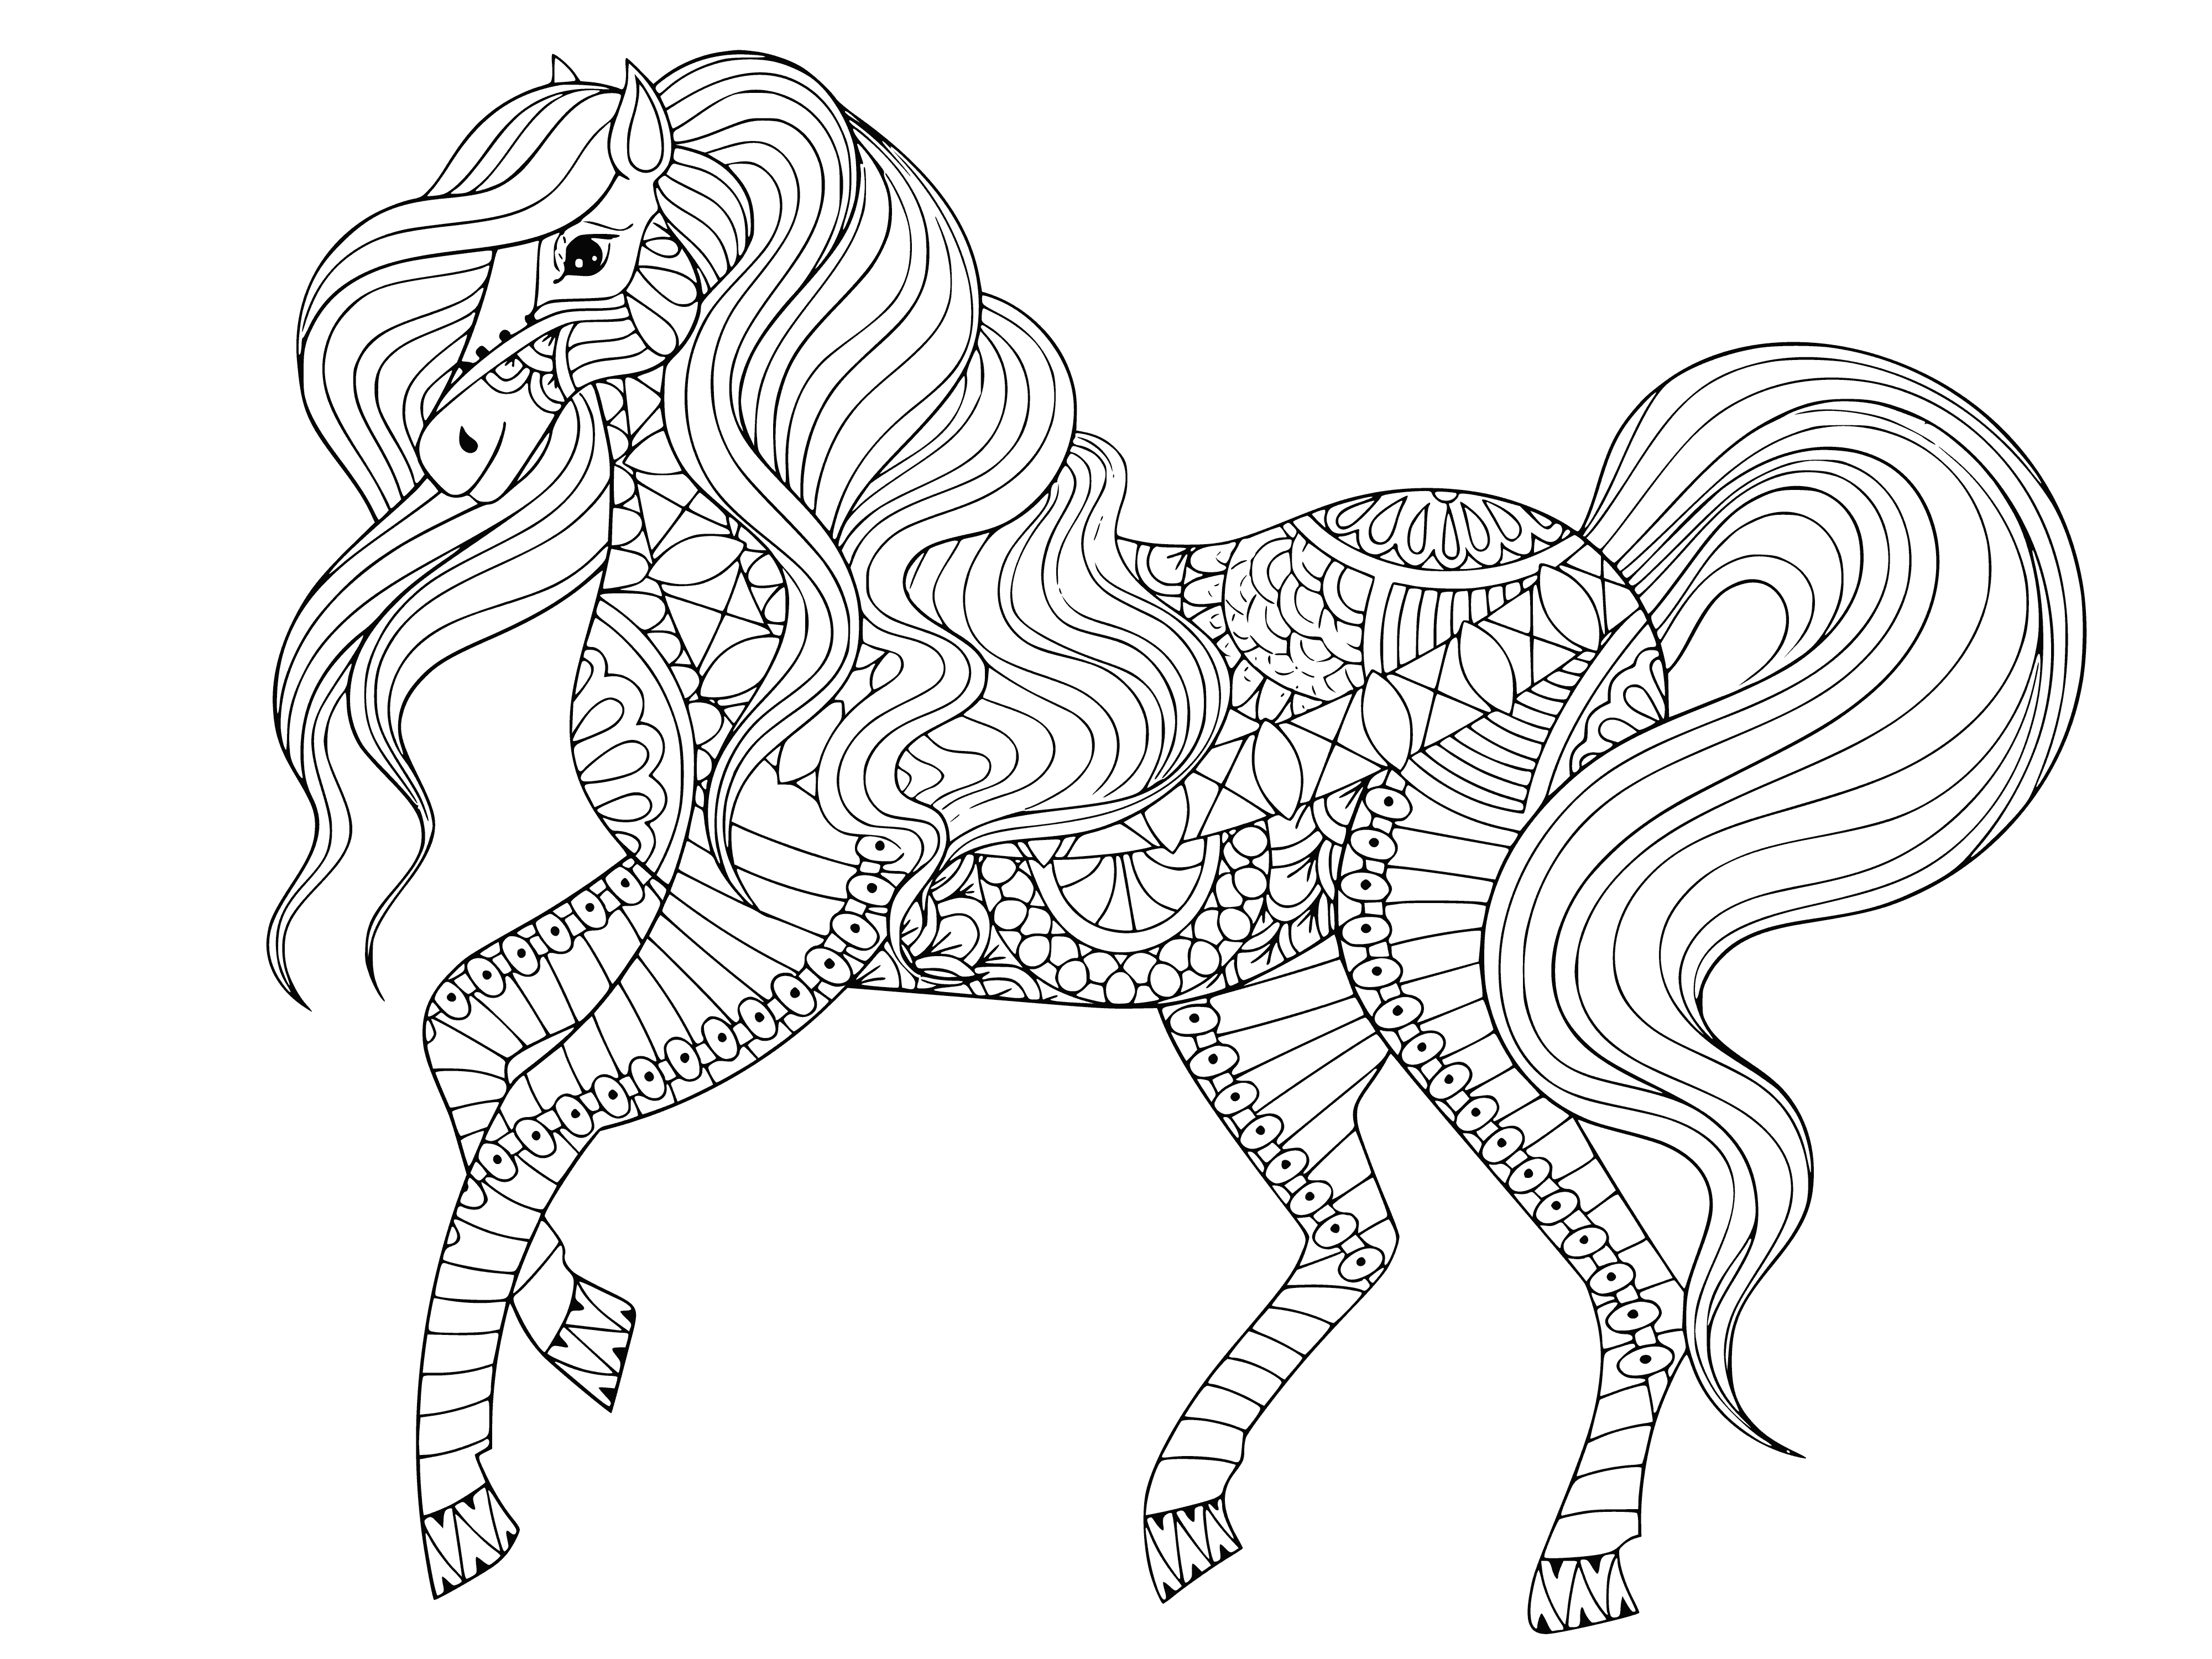 coloring page: Large horse in green field: brown & white, long tail & mane. #equine #horses